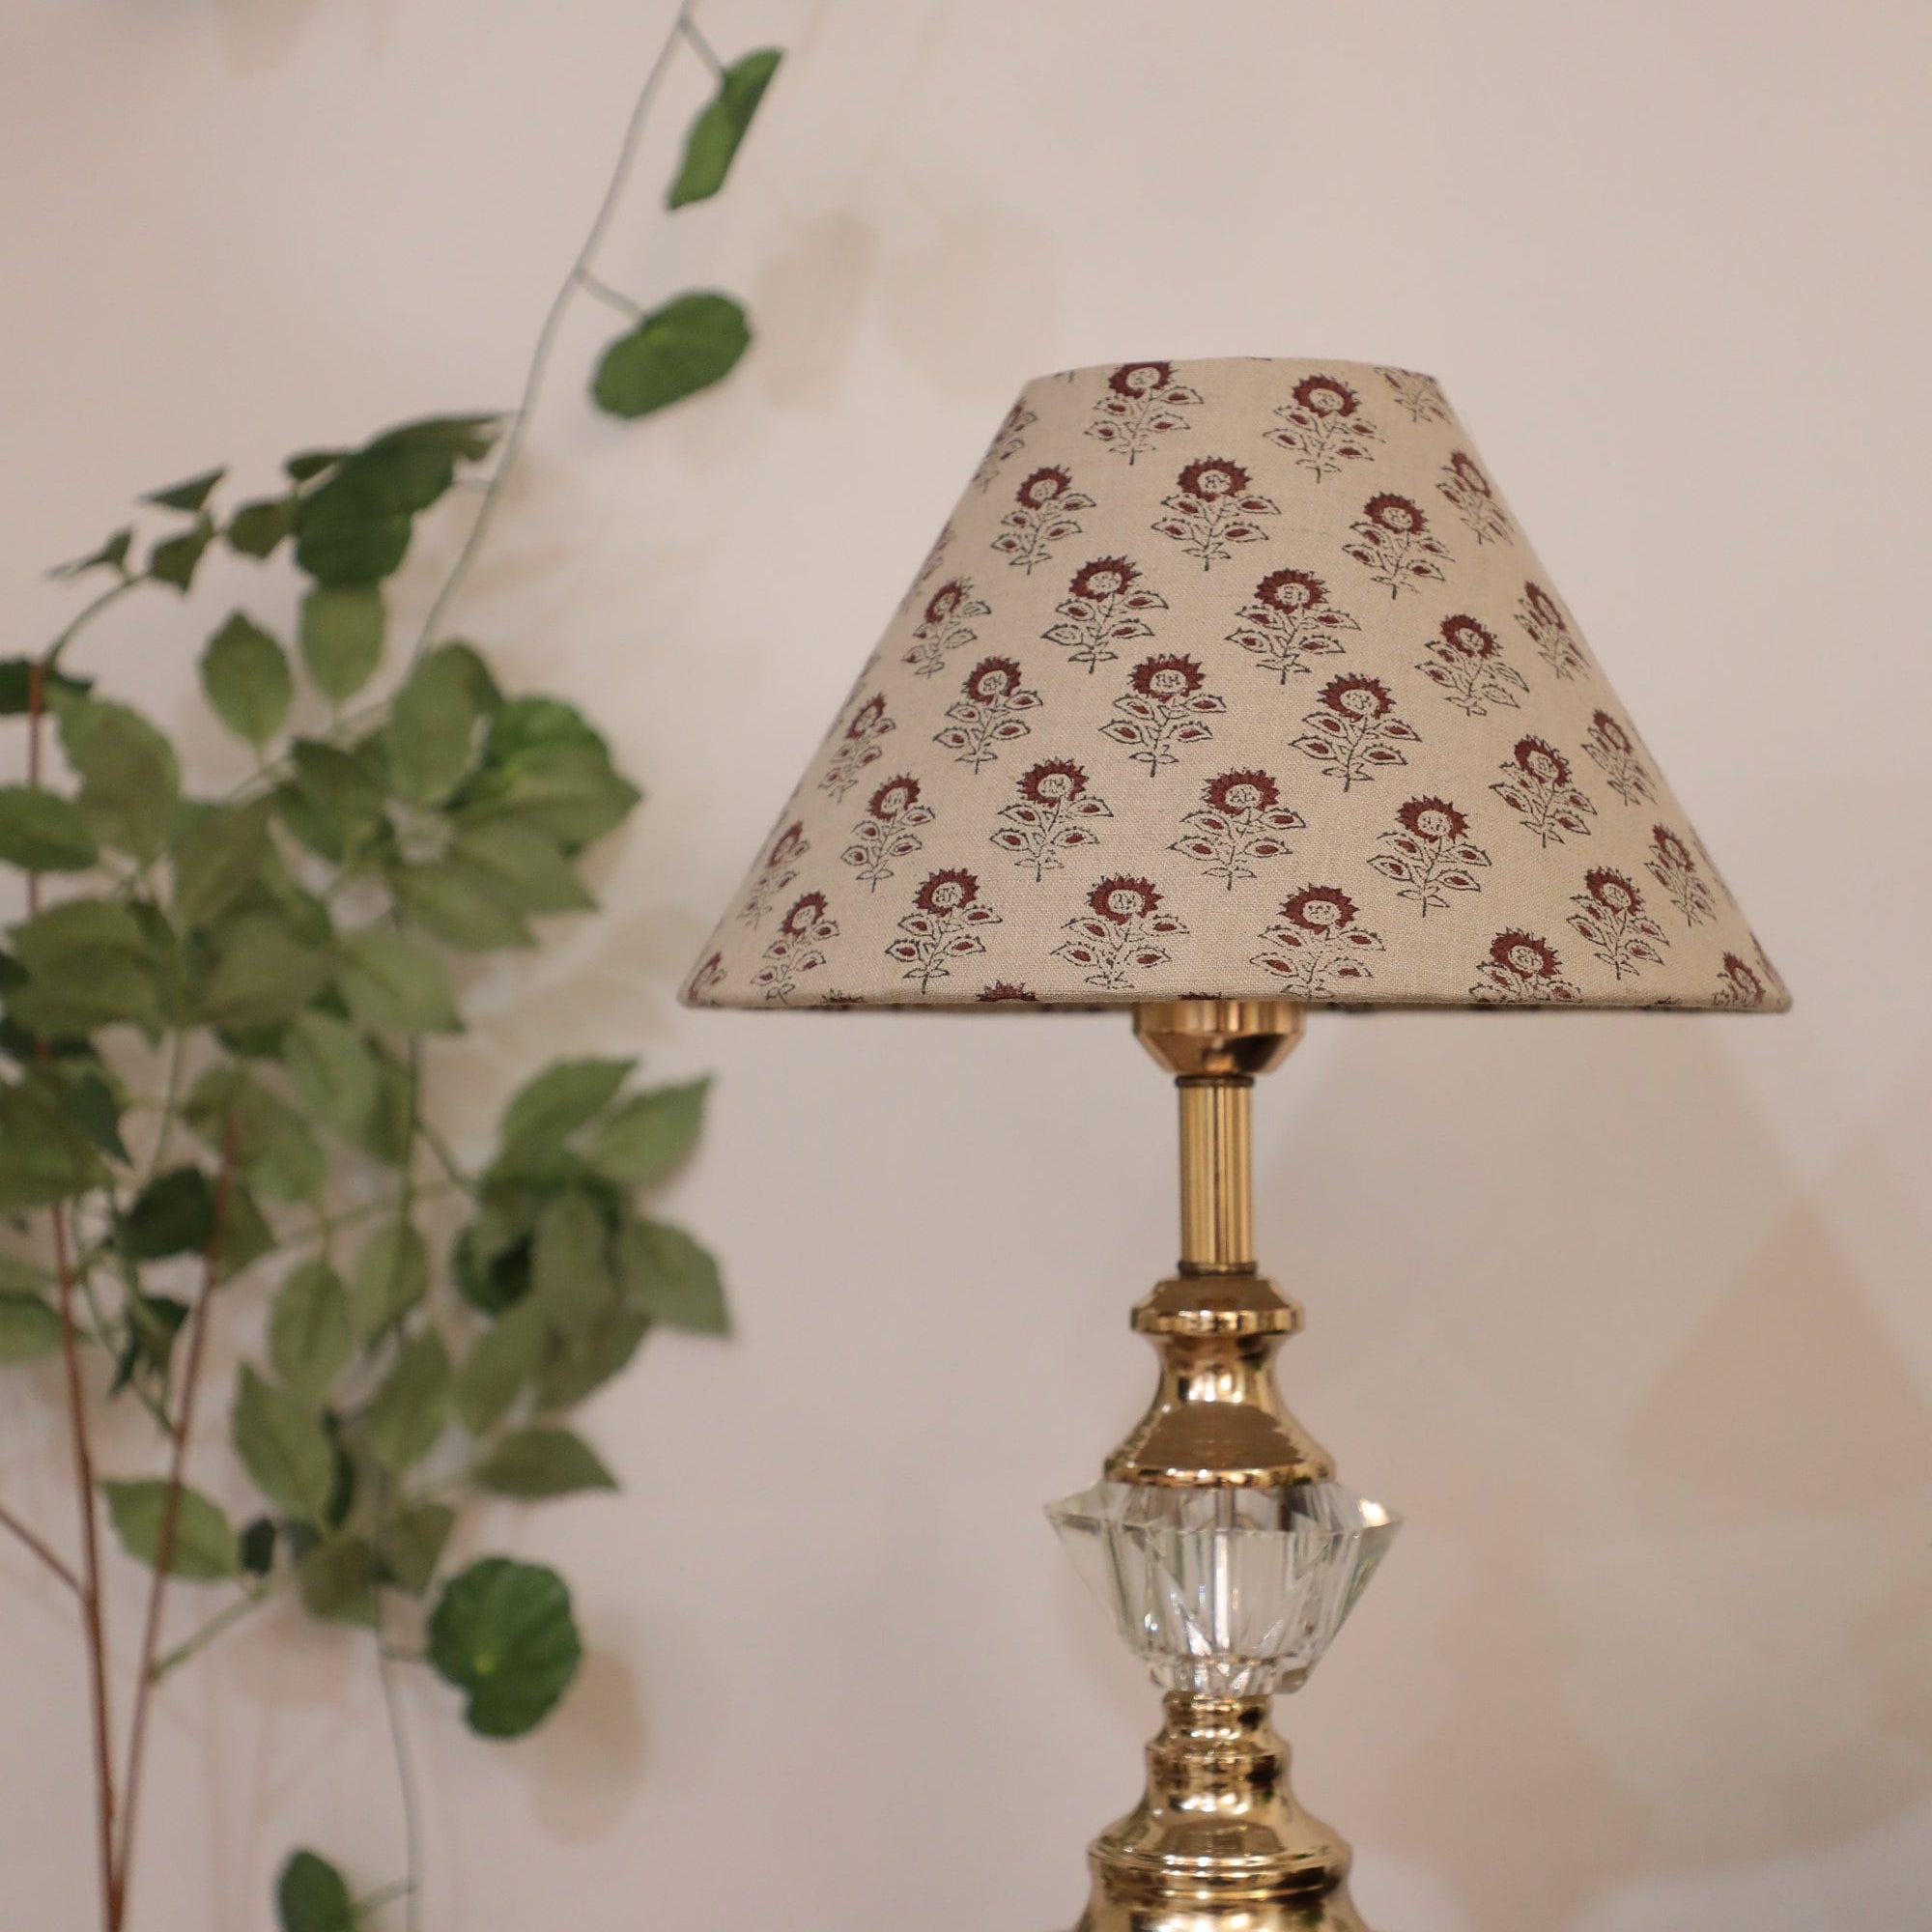 Floral Linen Lamp Shades - Set of 2 Block Printed Fabric Lampshades for Floor and Table Lamps - Bagru Buti